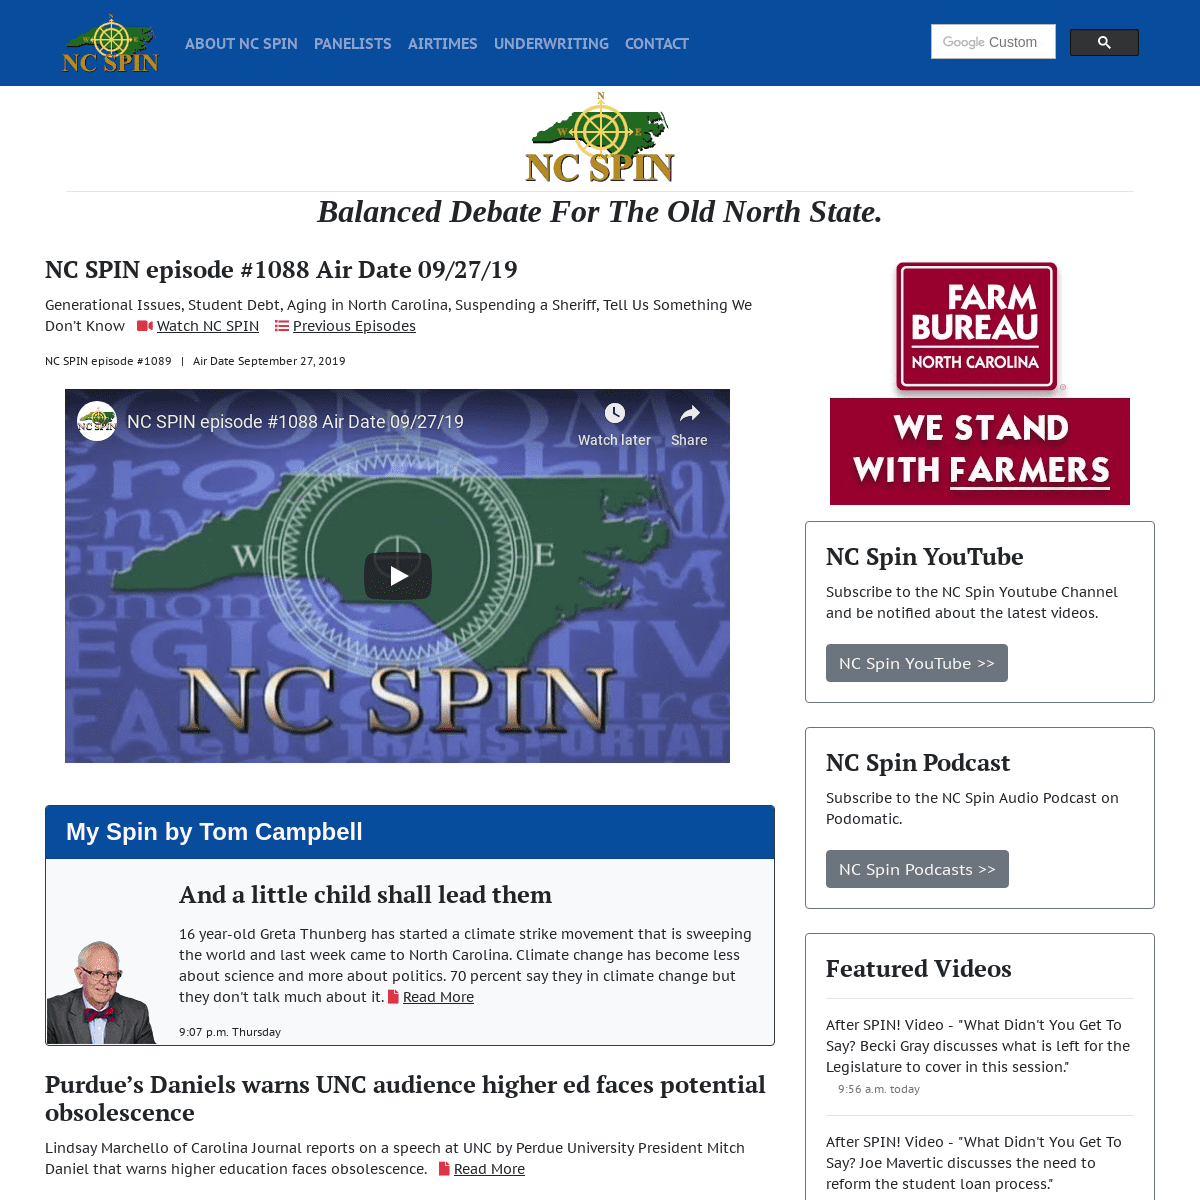 NC SPIN: Balanced Debate for the Old North State